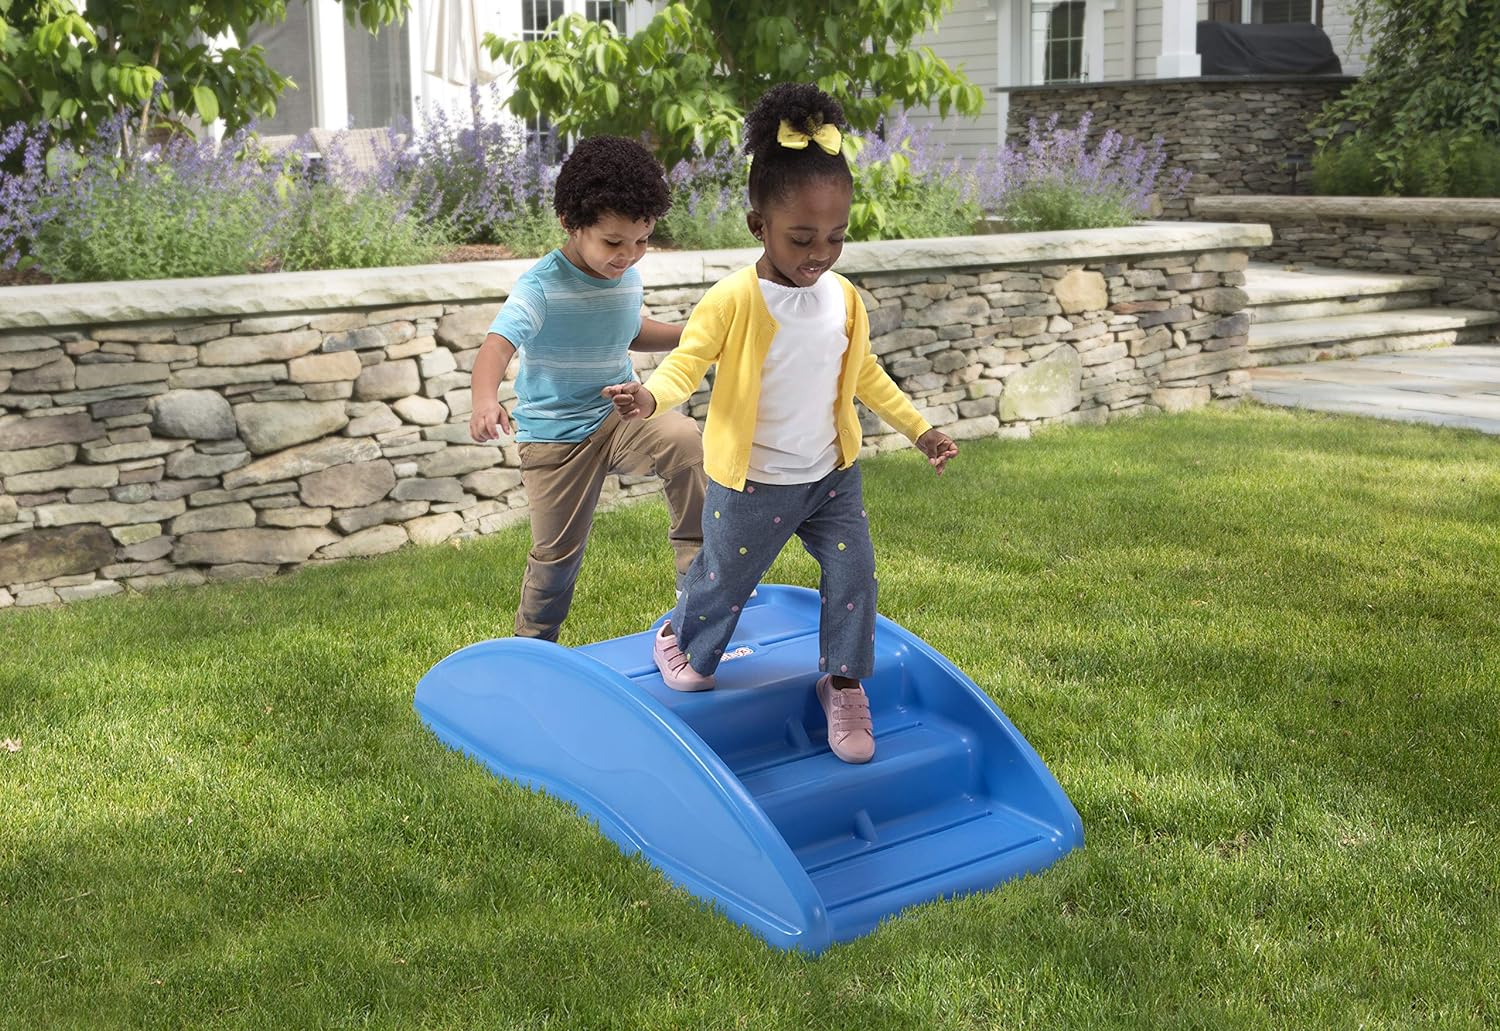 Maximize Fun and Safety In Your Backyard: Little Tikes Slide Buying Guide For 2022